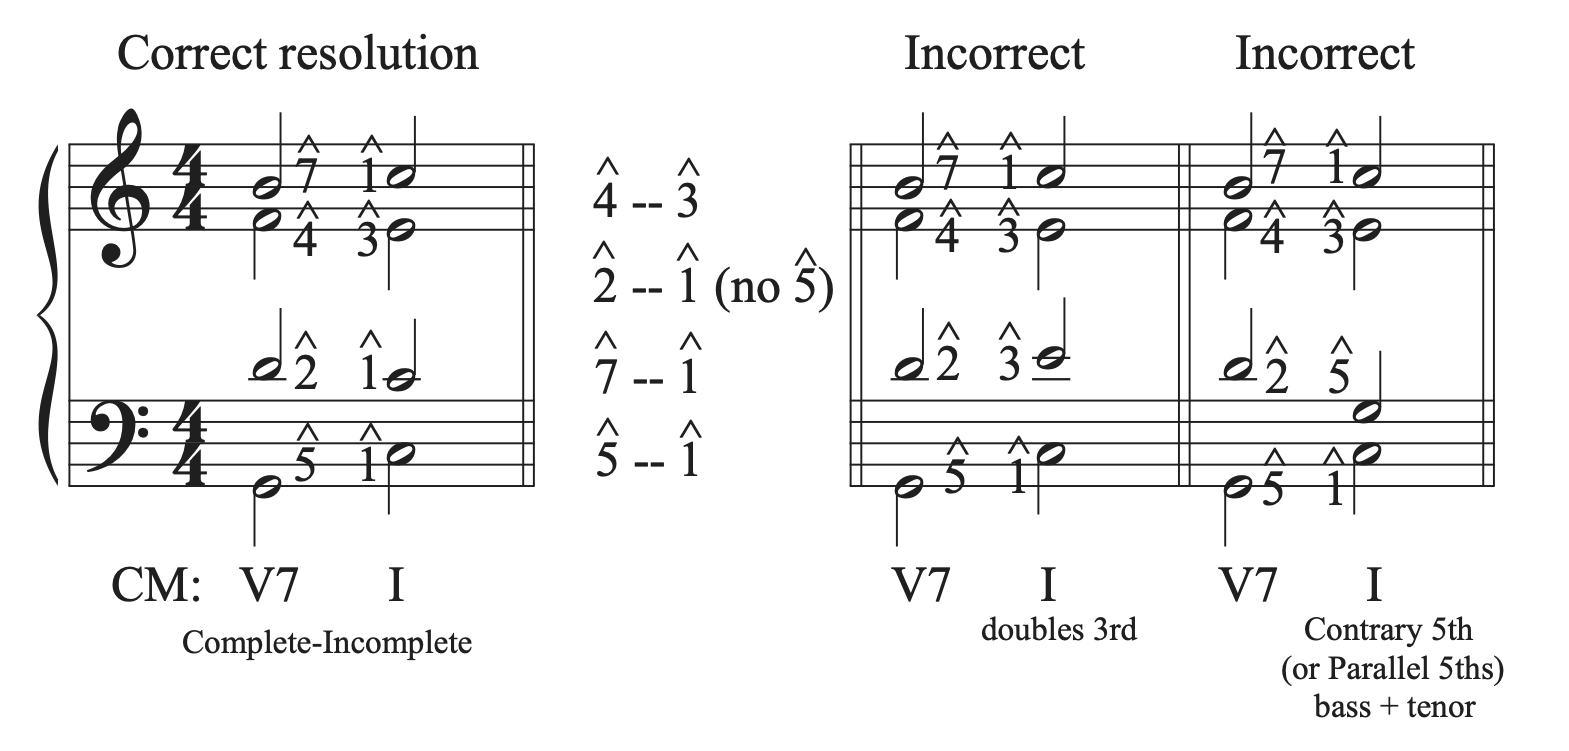 A musical example showing a complete V7 to an incomplete I with correct and incorrect resolutions.